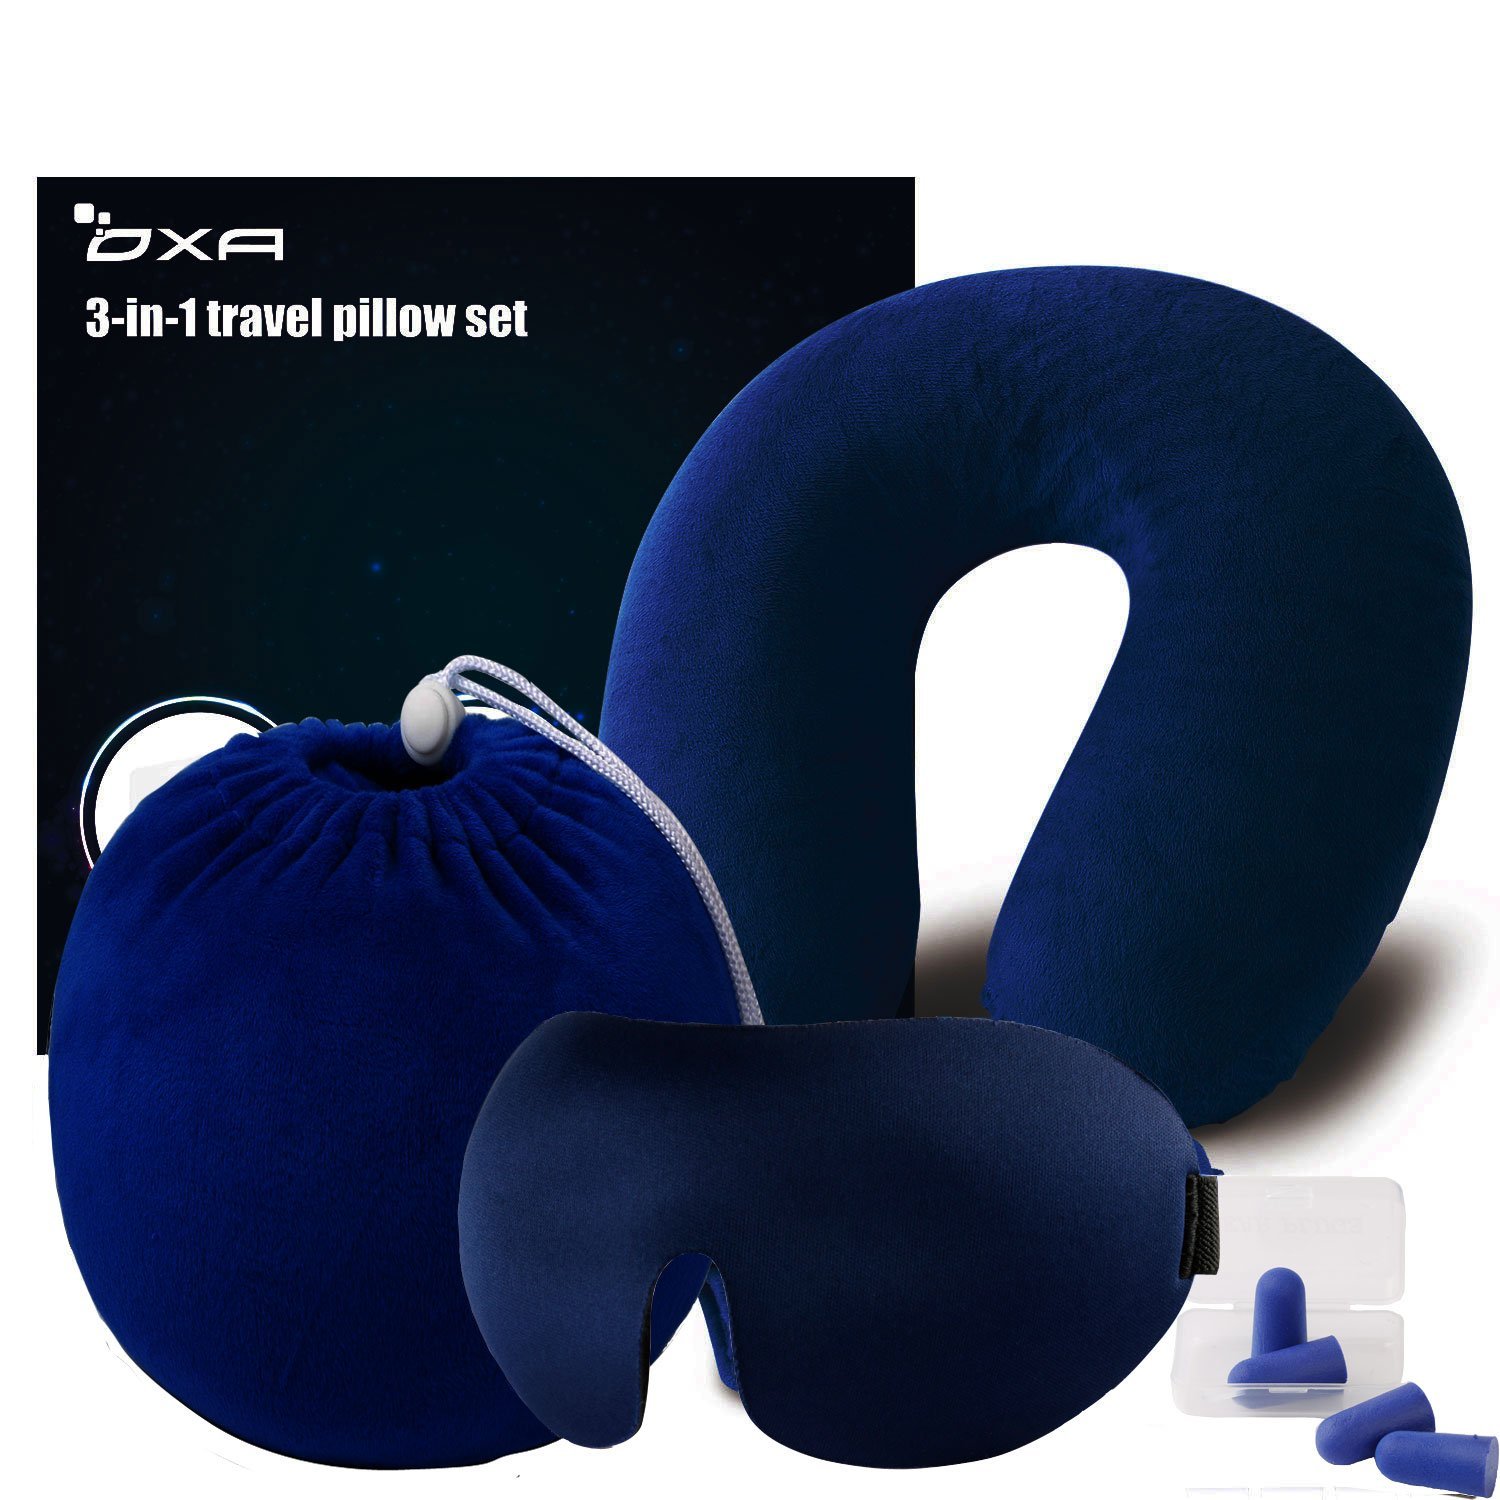 3 in 1 neck pillow